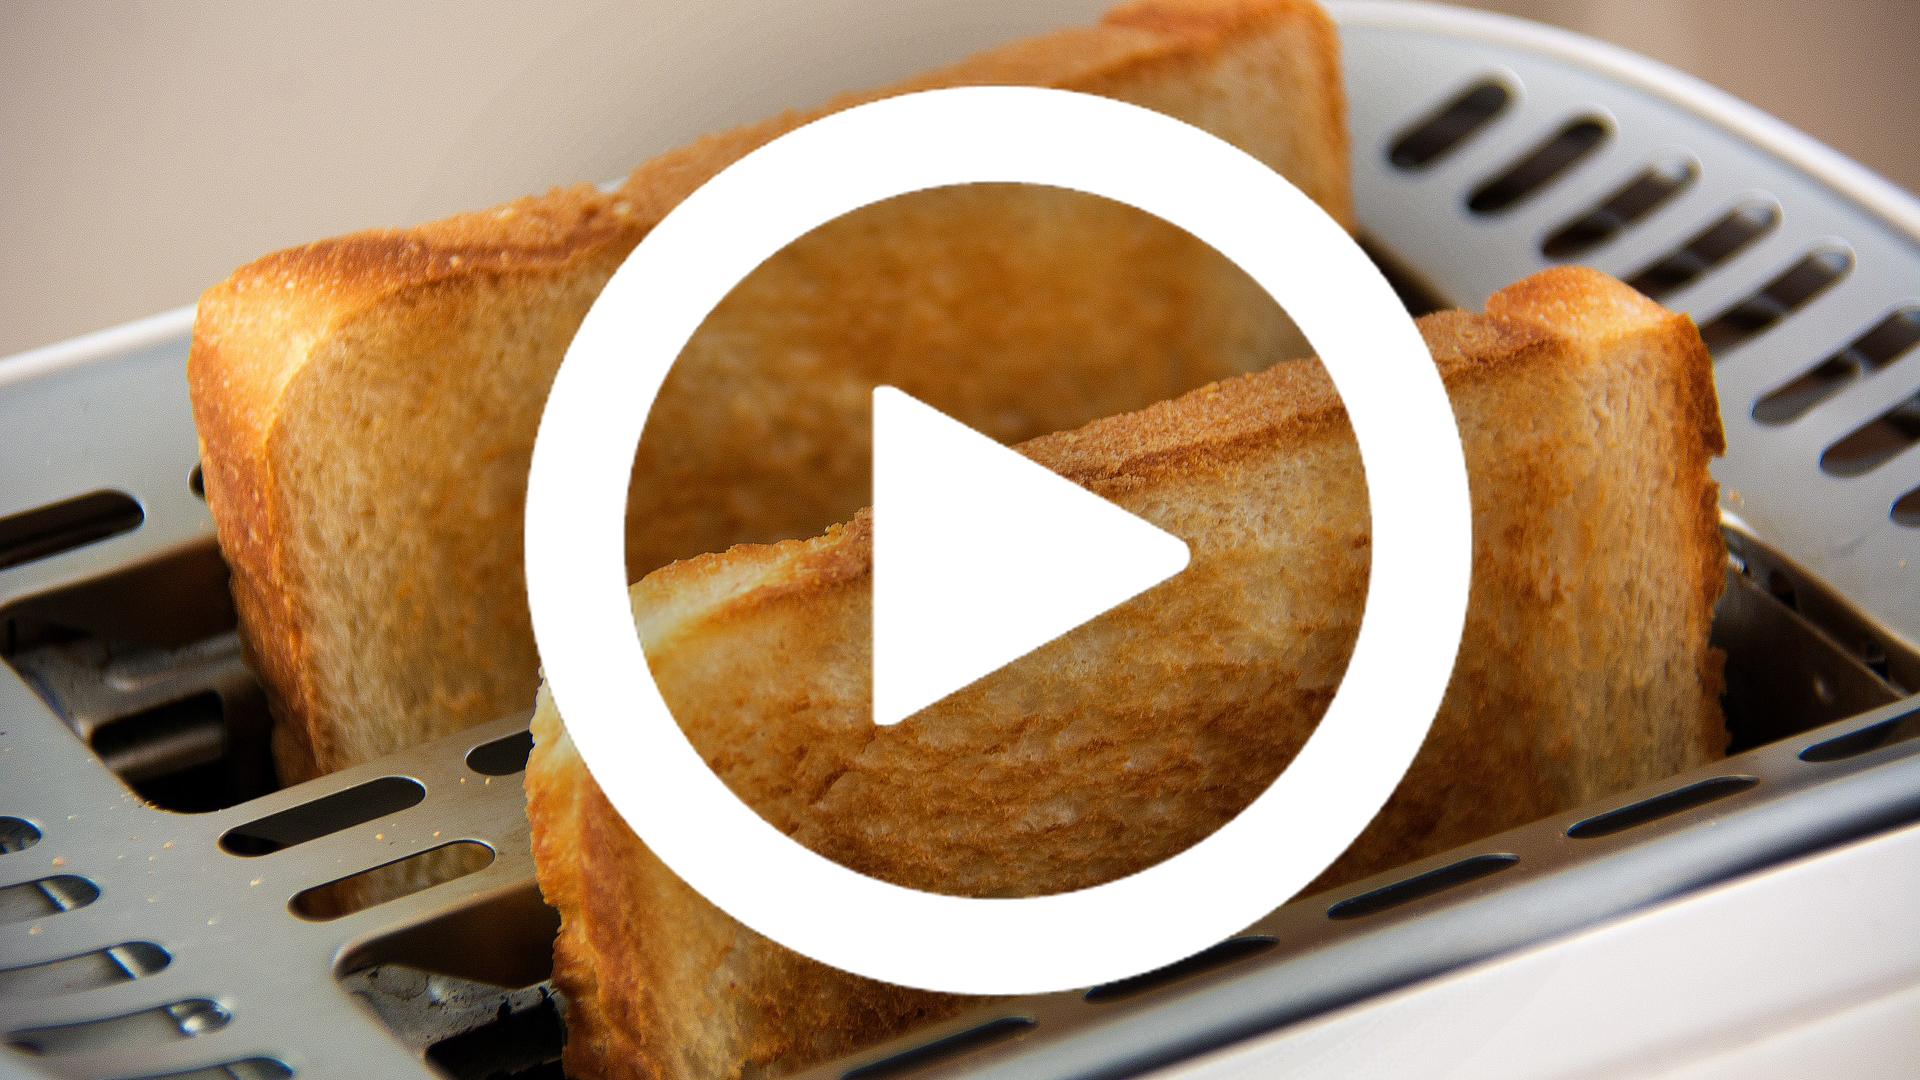 How to toast bread and bagels with the Dualit Lite Toaster 